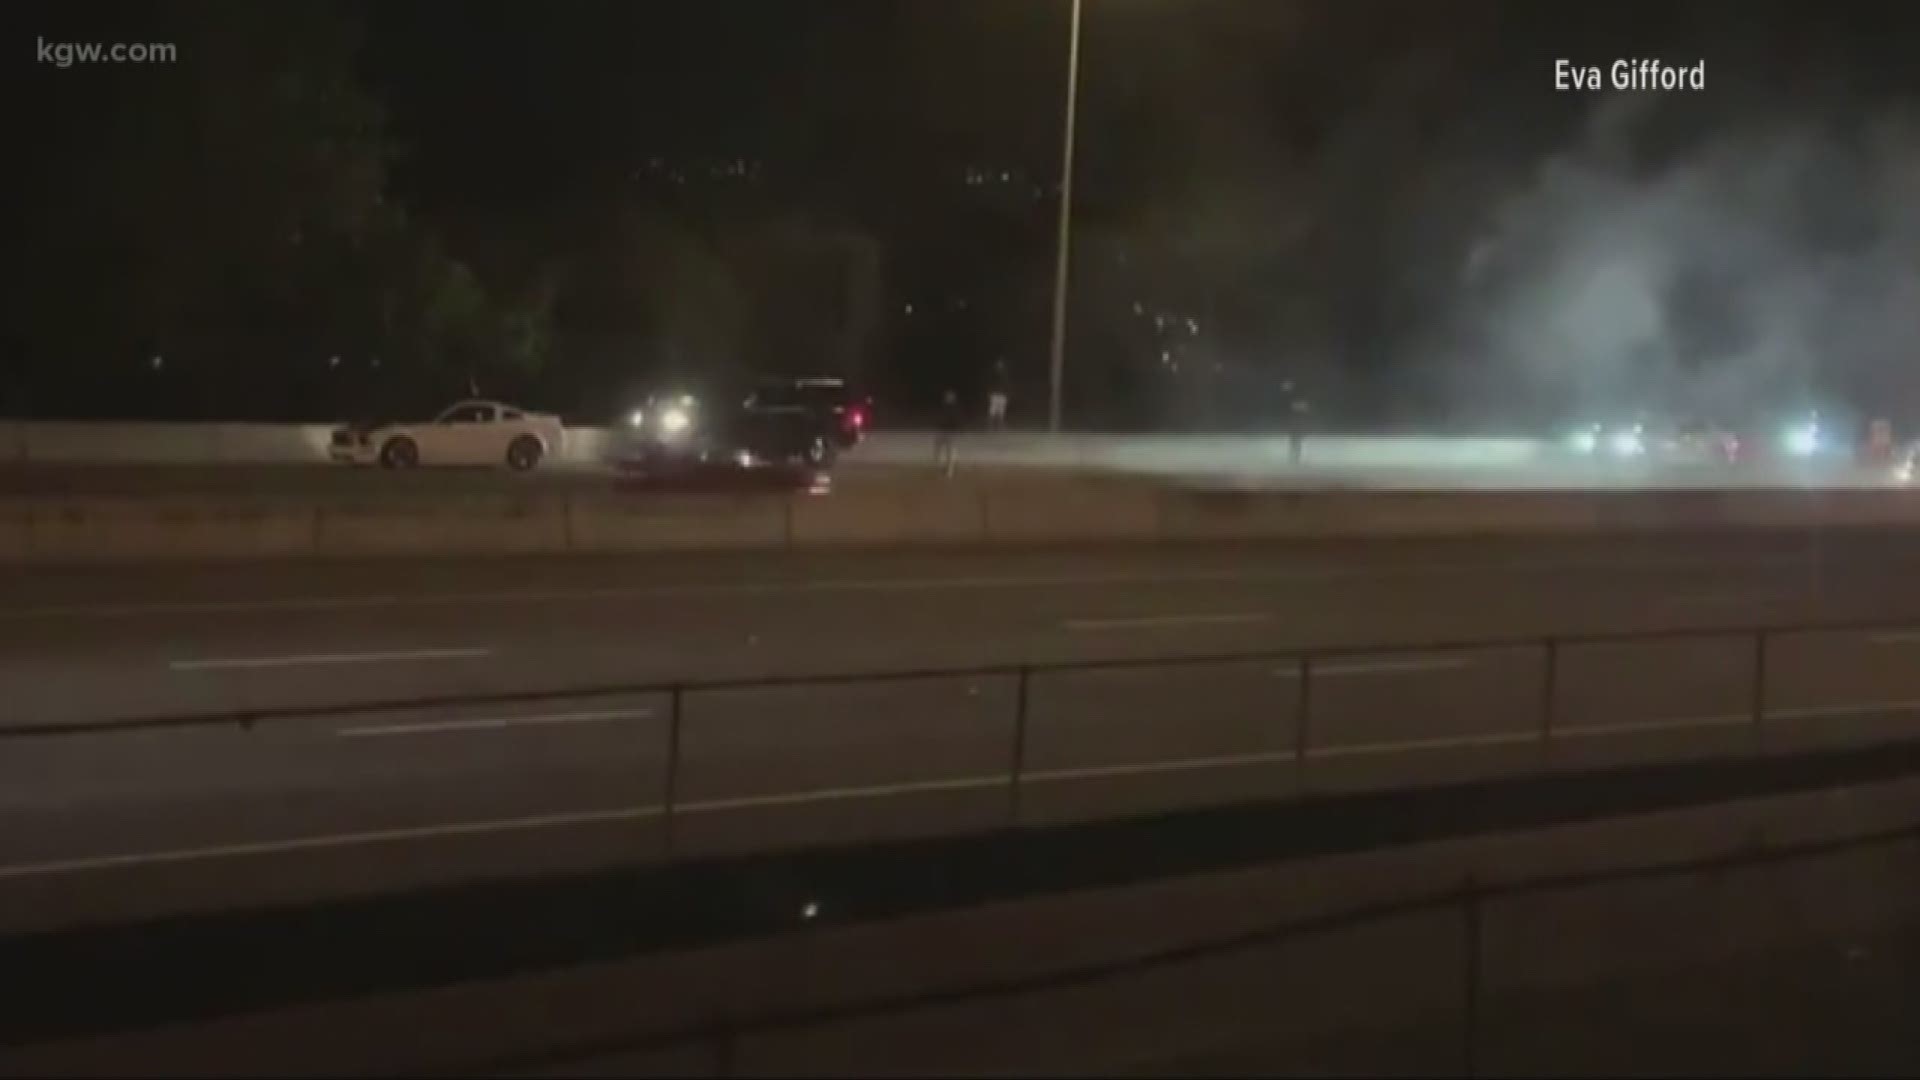 Video obtained by KGW shows a wild scene on Interstate 84 late Sunday night, a bunch of cars doing donuts in the middle of the westbound lanes.